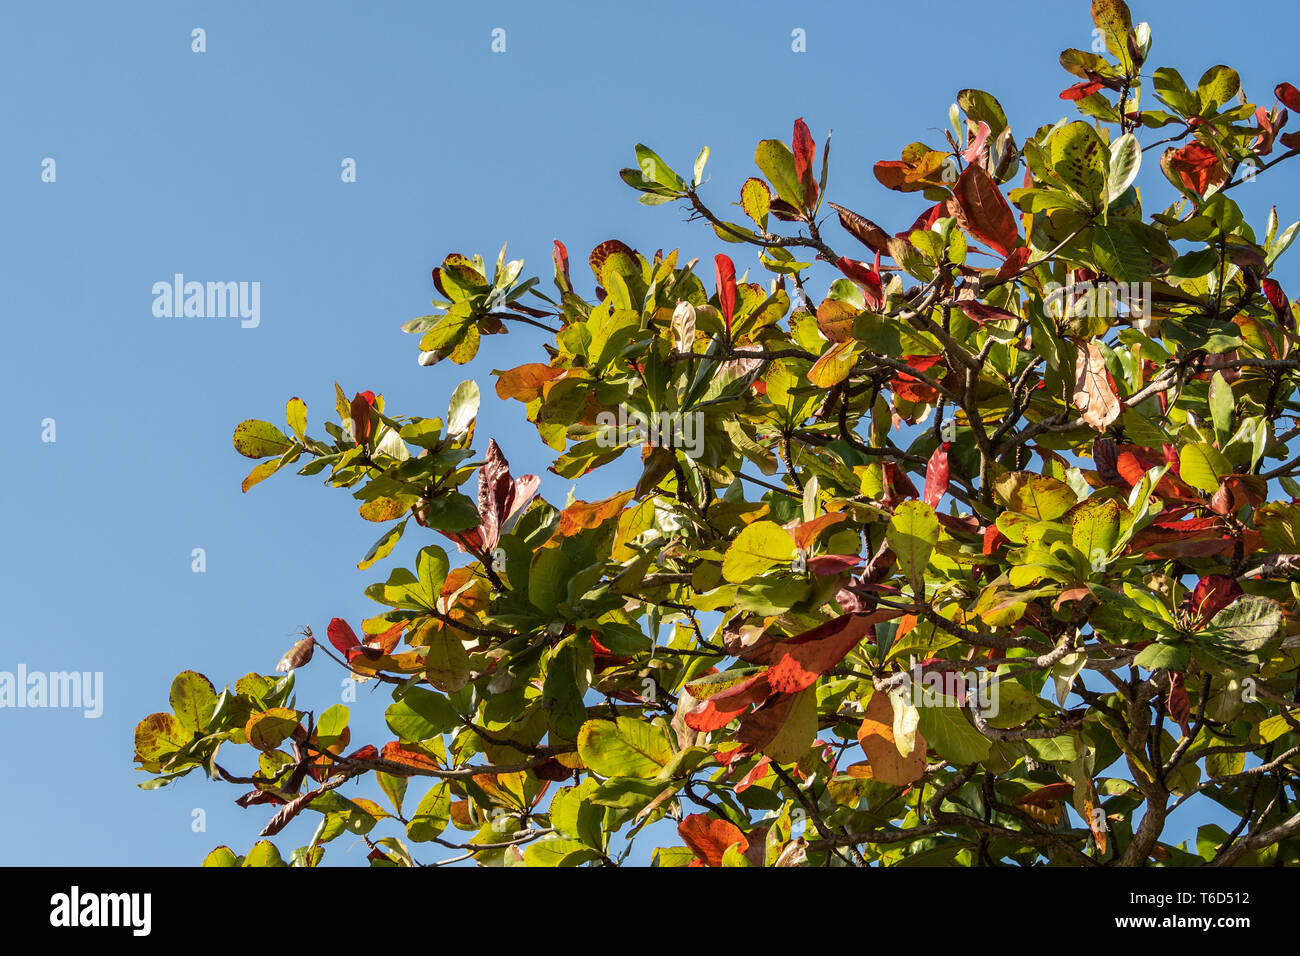 Indian Almond tree against a blue sky with autumn leaves Stock Photo